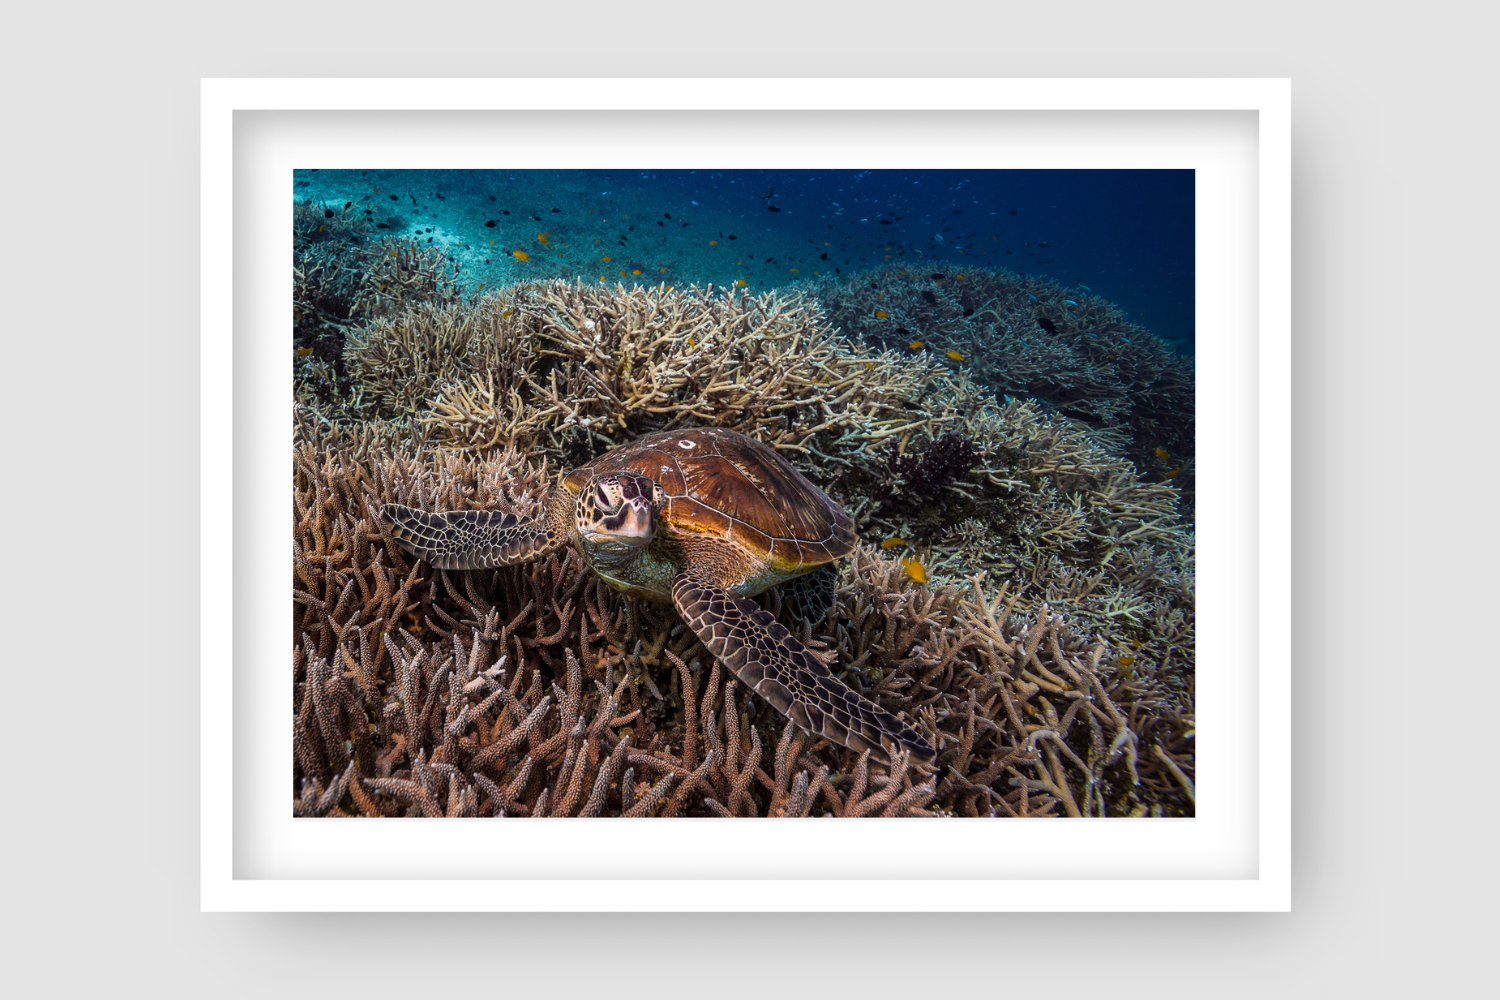 sea turtle gliding across coral reef with small yellow fishing darting around